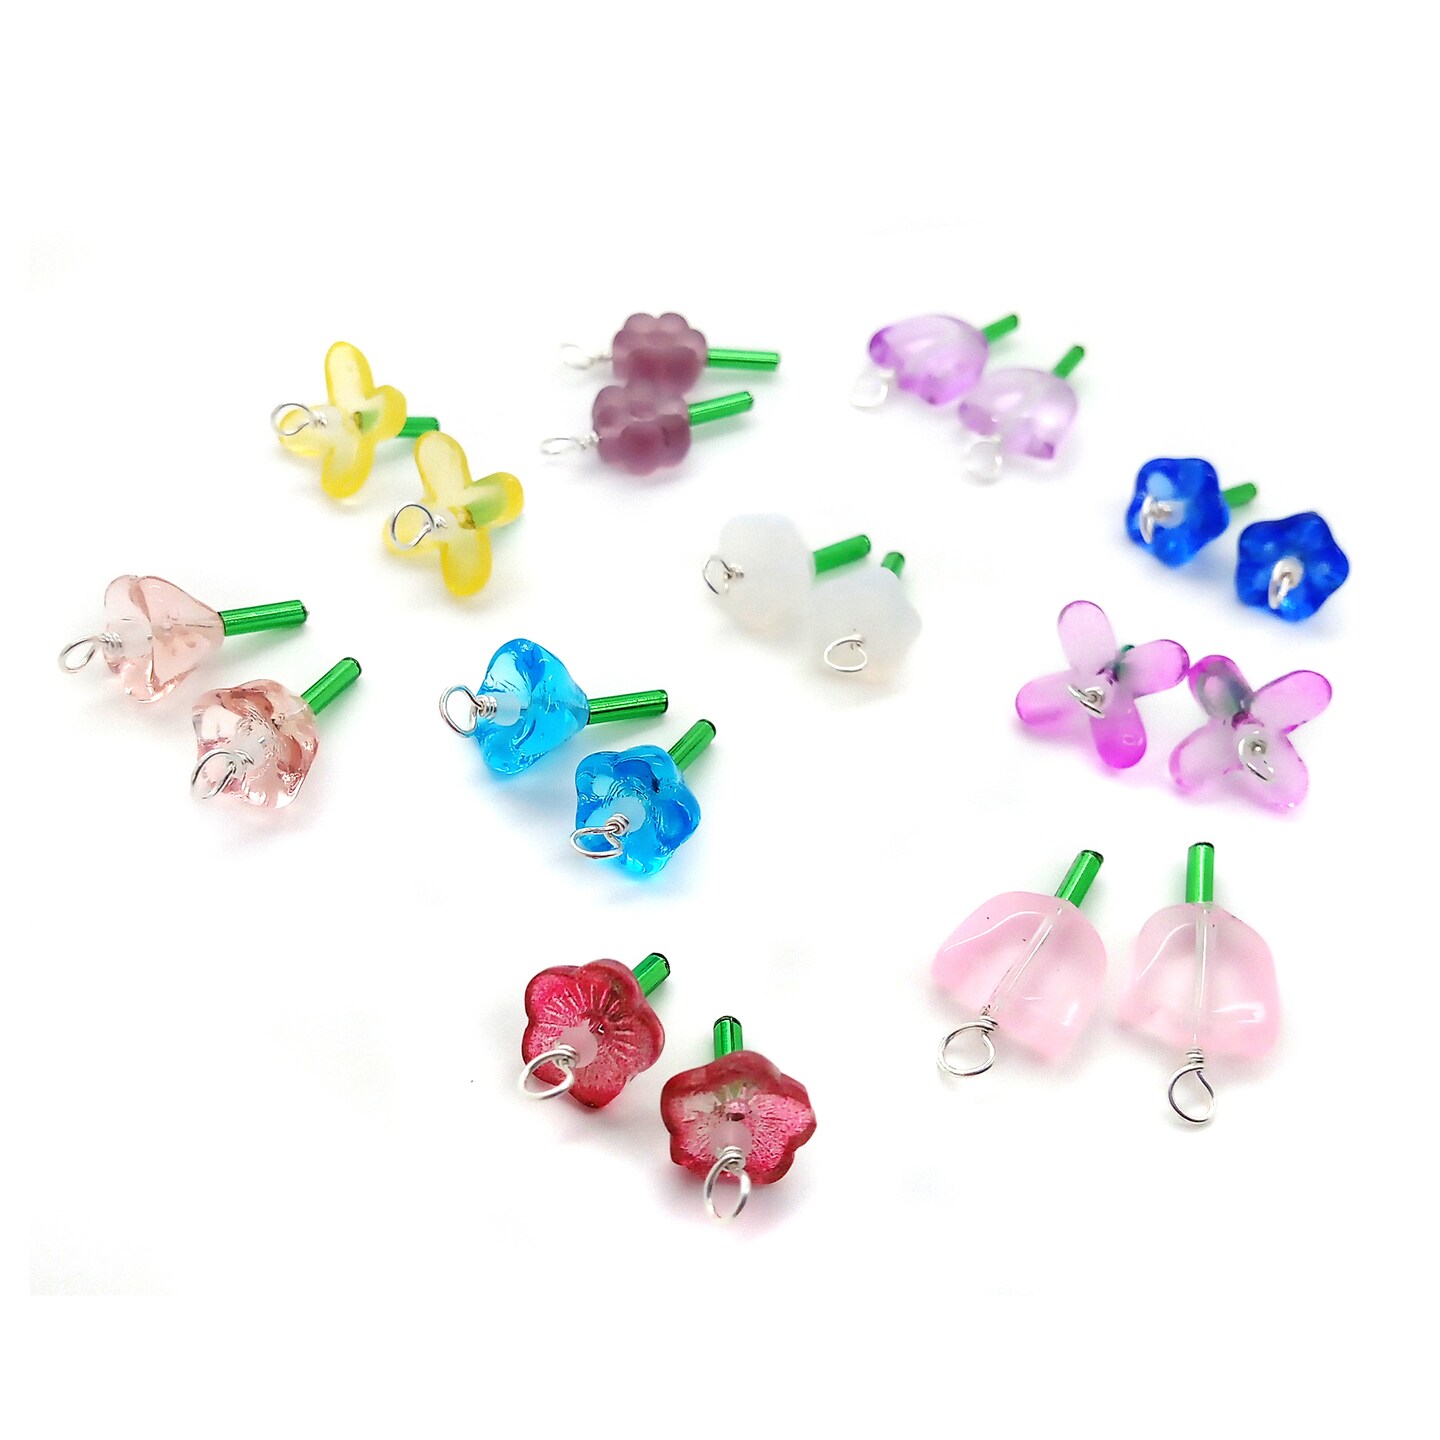 20 Flower Charms to Make Earrings, Matching Pairs of Glass Bead Dangles, Adorabilities